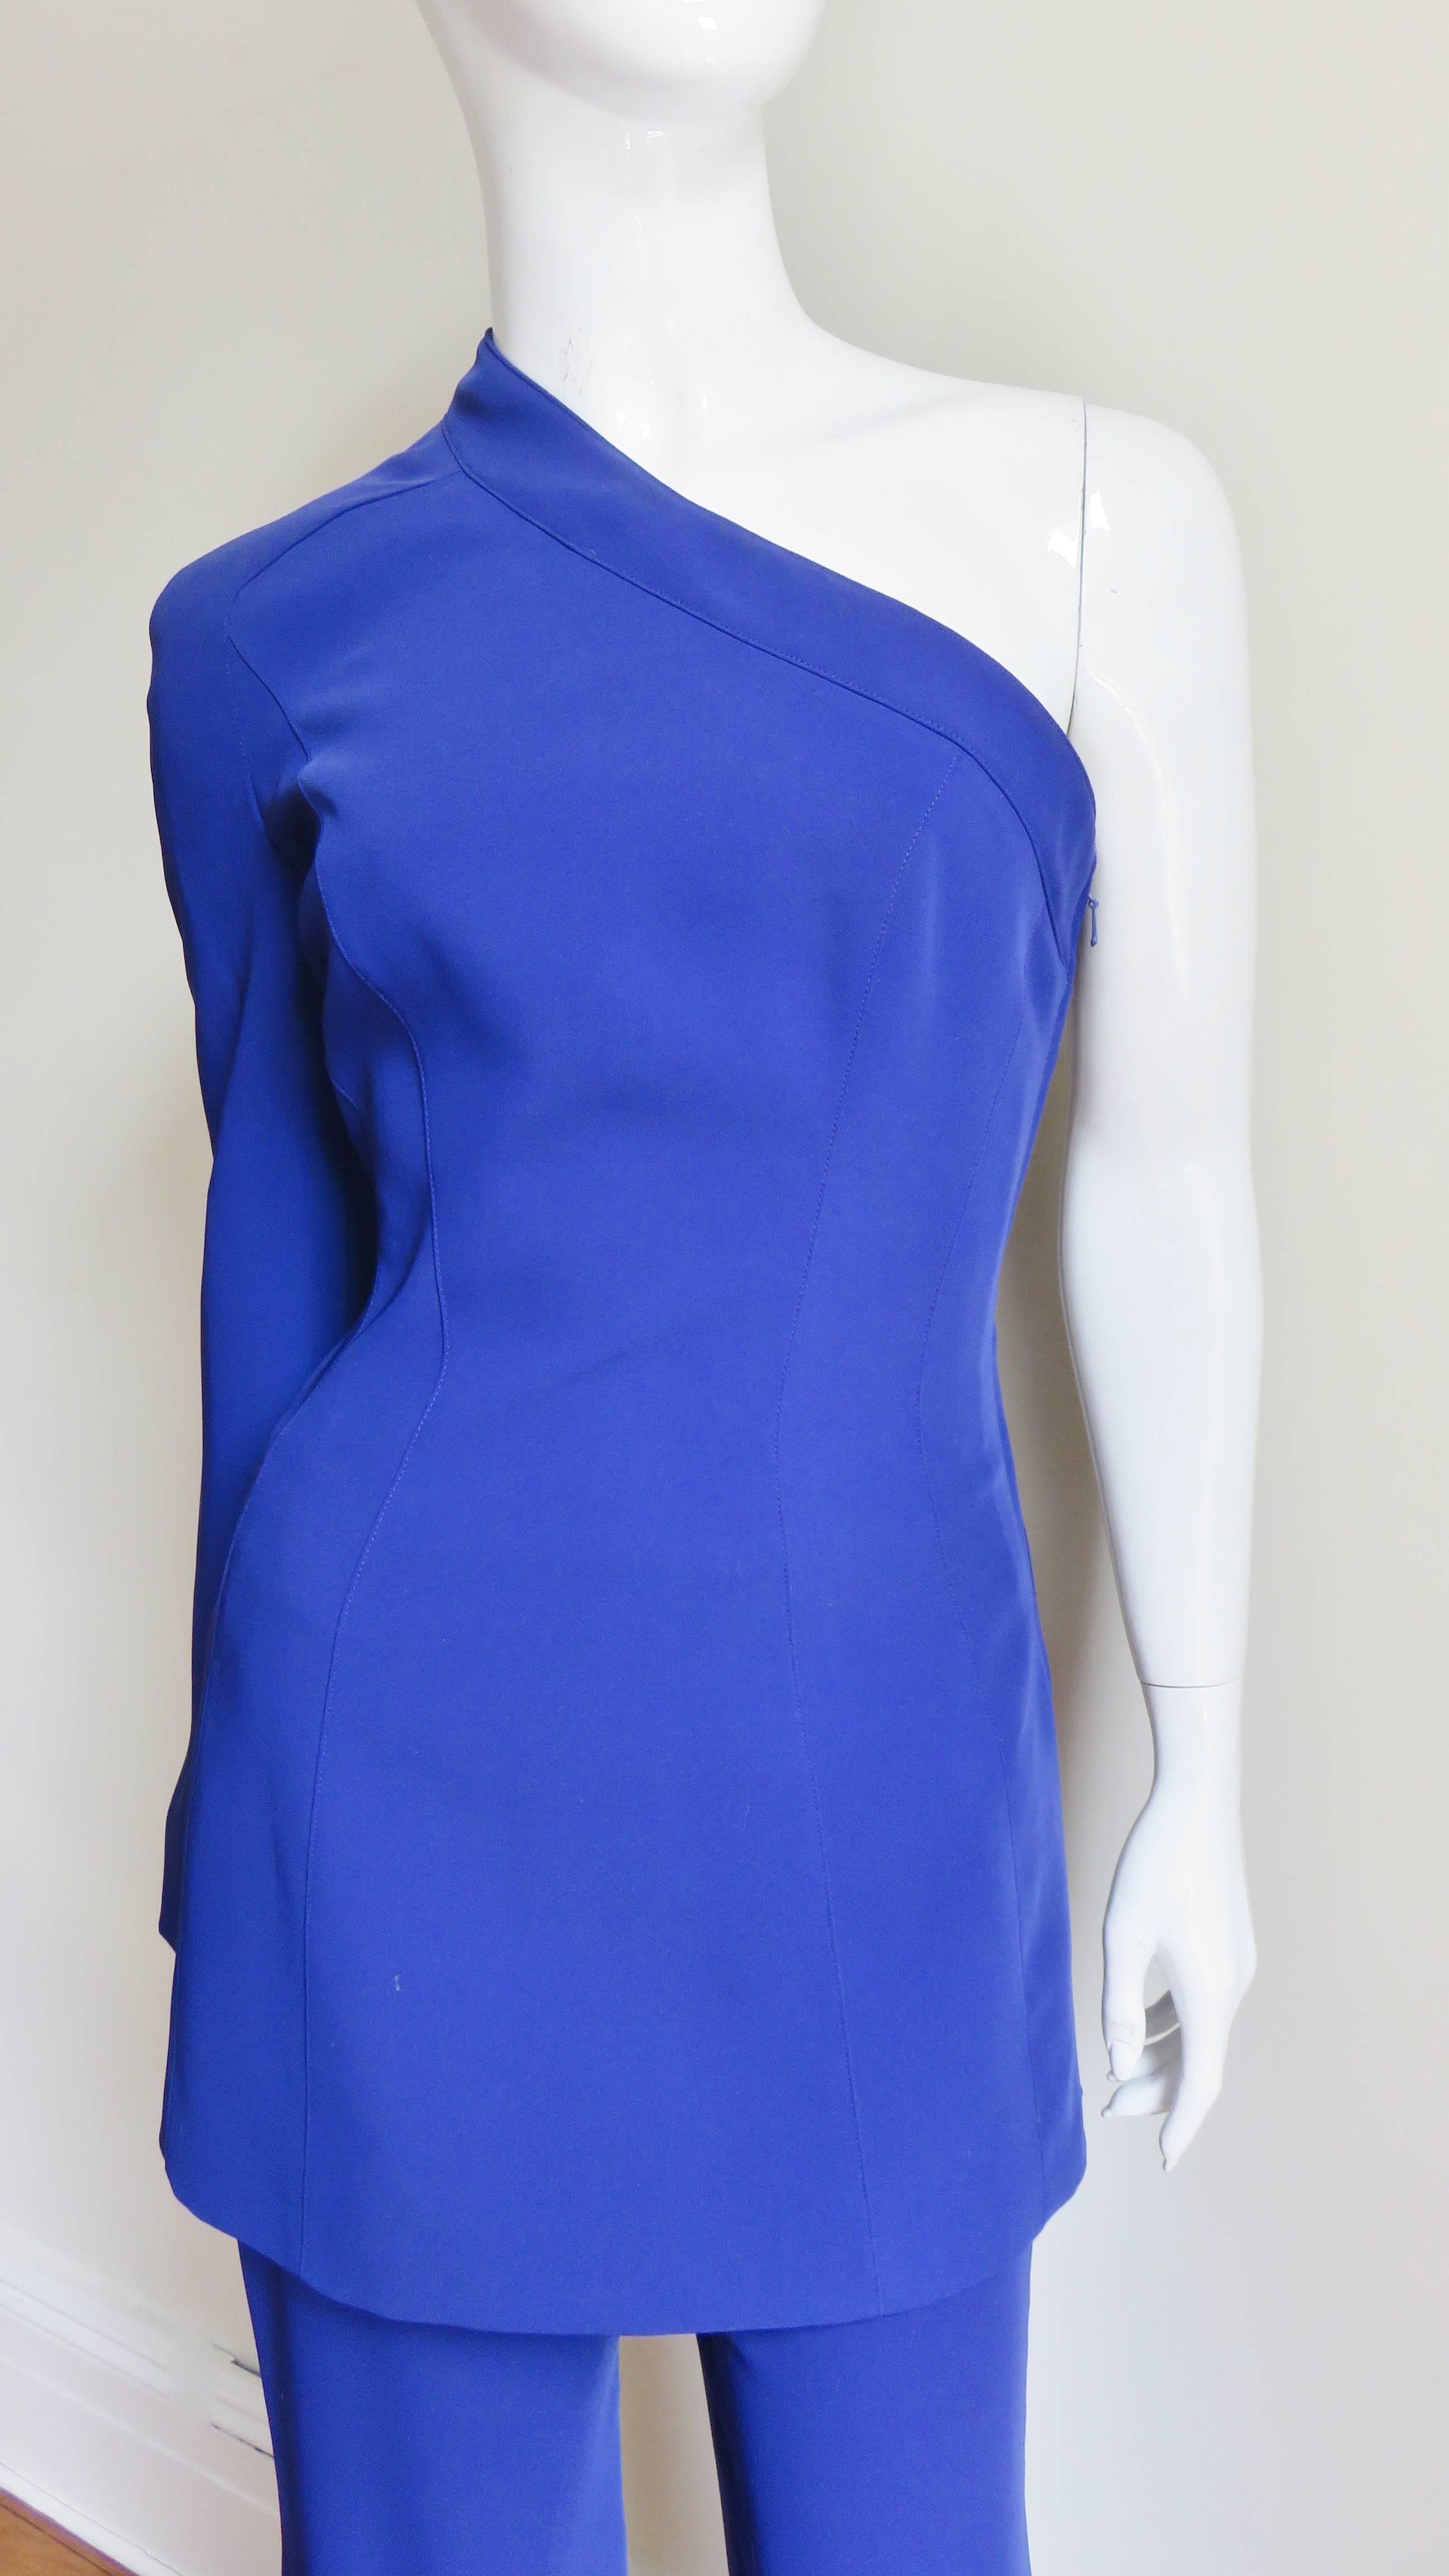 A clever and unique purple pant suit from Thierry Mugler.  It is comprised of a long jacket over full leg pants with a back zipper.  The tunic jacket has long bell sleeves, one which snaps into place and is removable. It has a side separating zipper